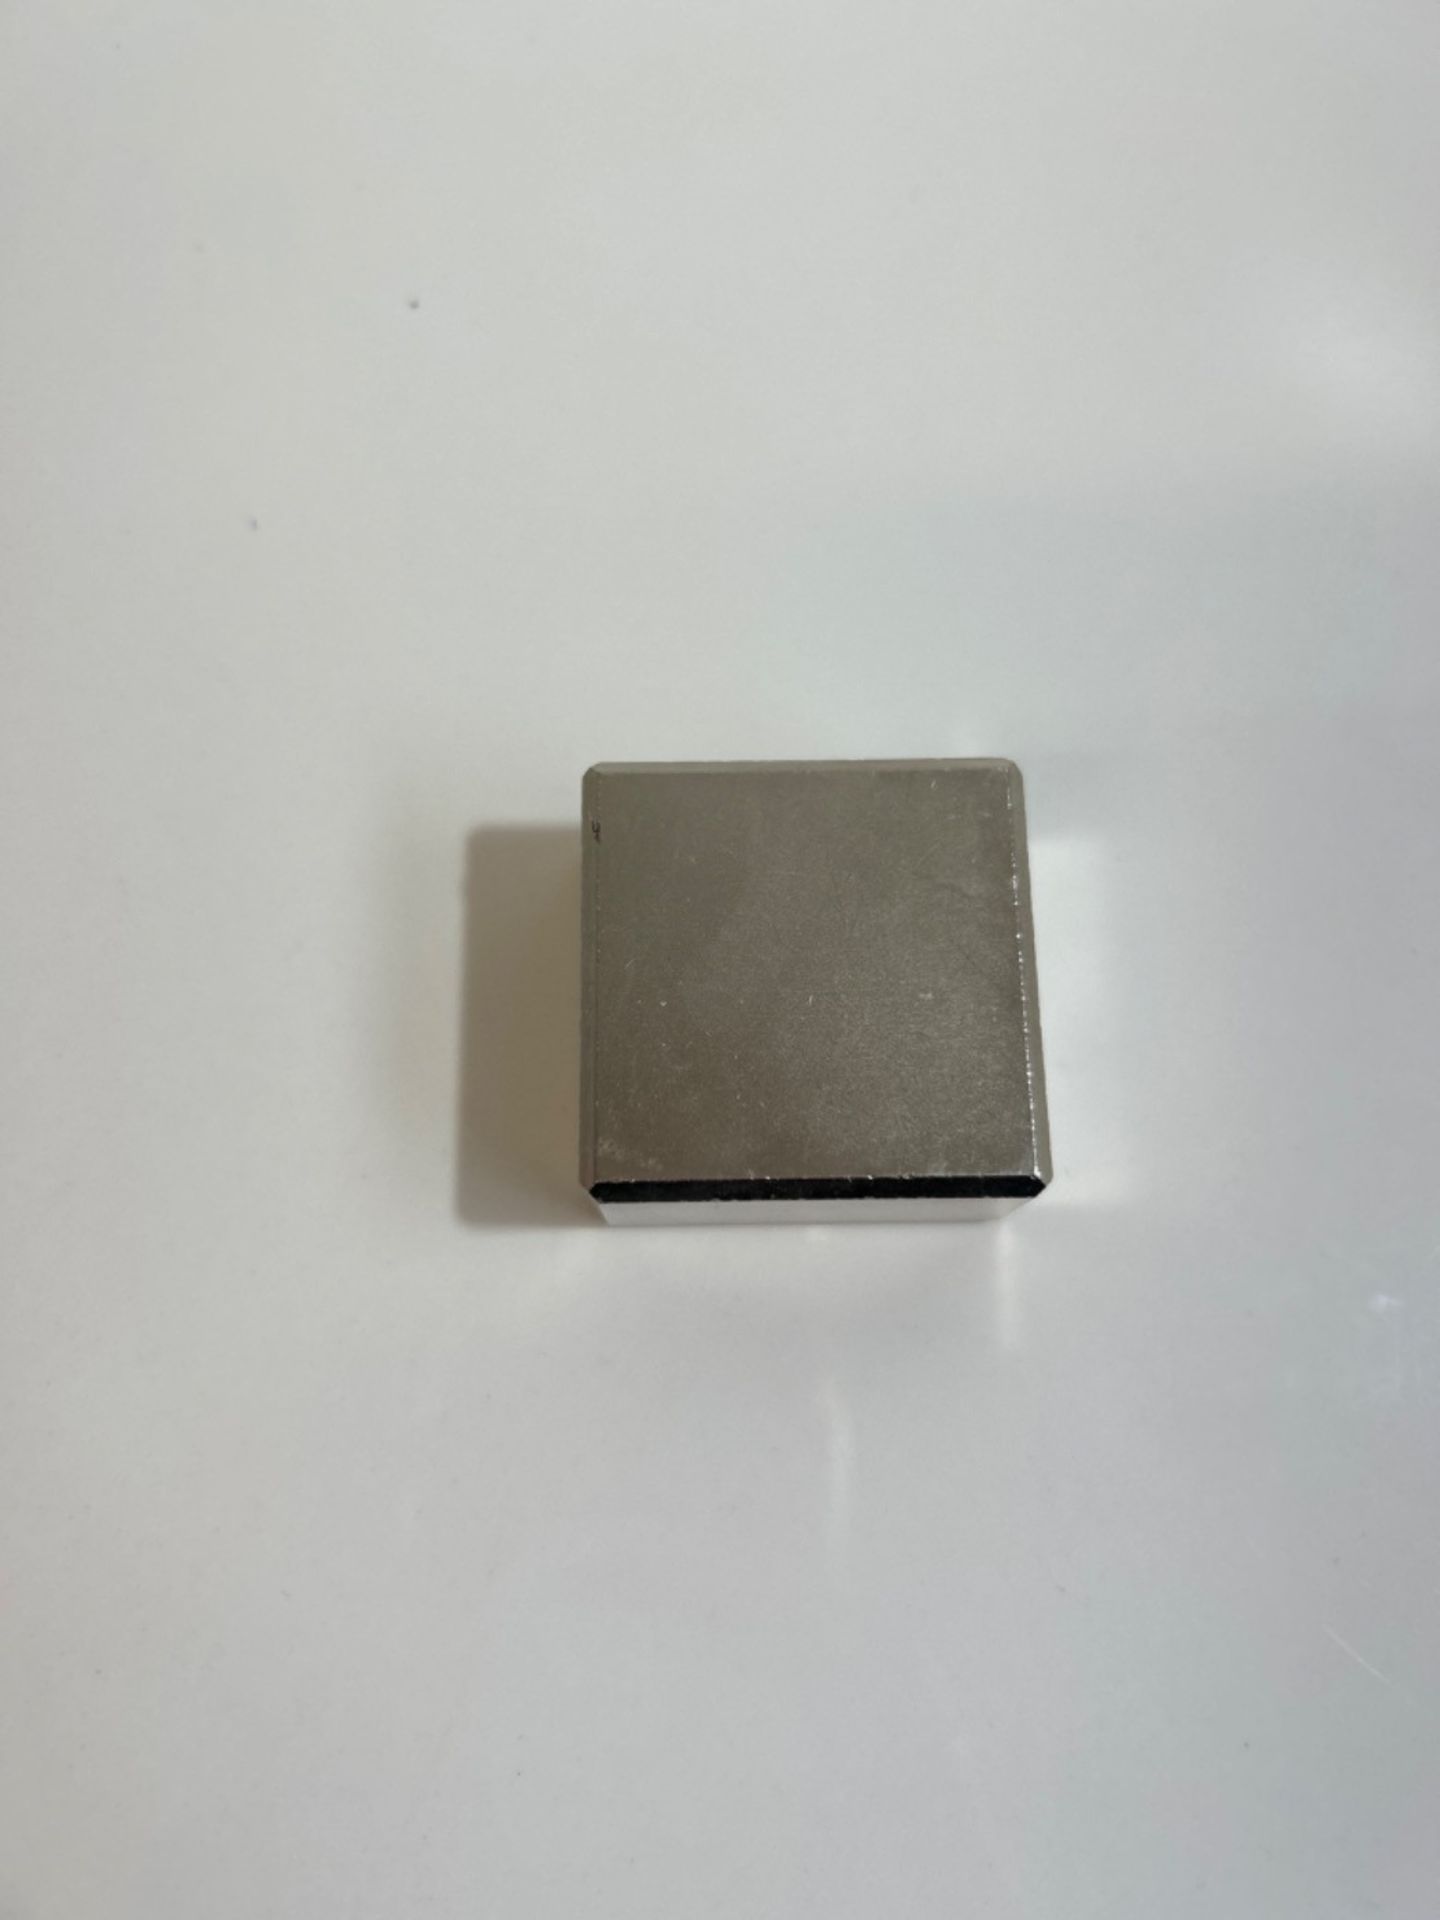 FINDMAG 40 x 40 x 20 mm Strong Magnet, Heavy Duty Magnets Strong, Neodymium Magnets, Permanent Rare - Image 3 of 3